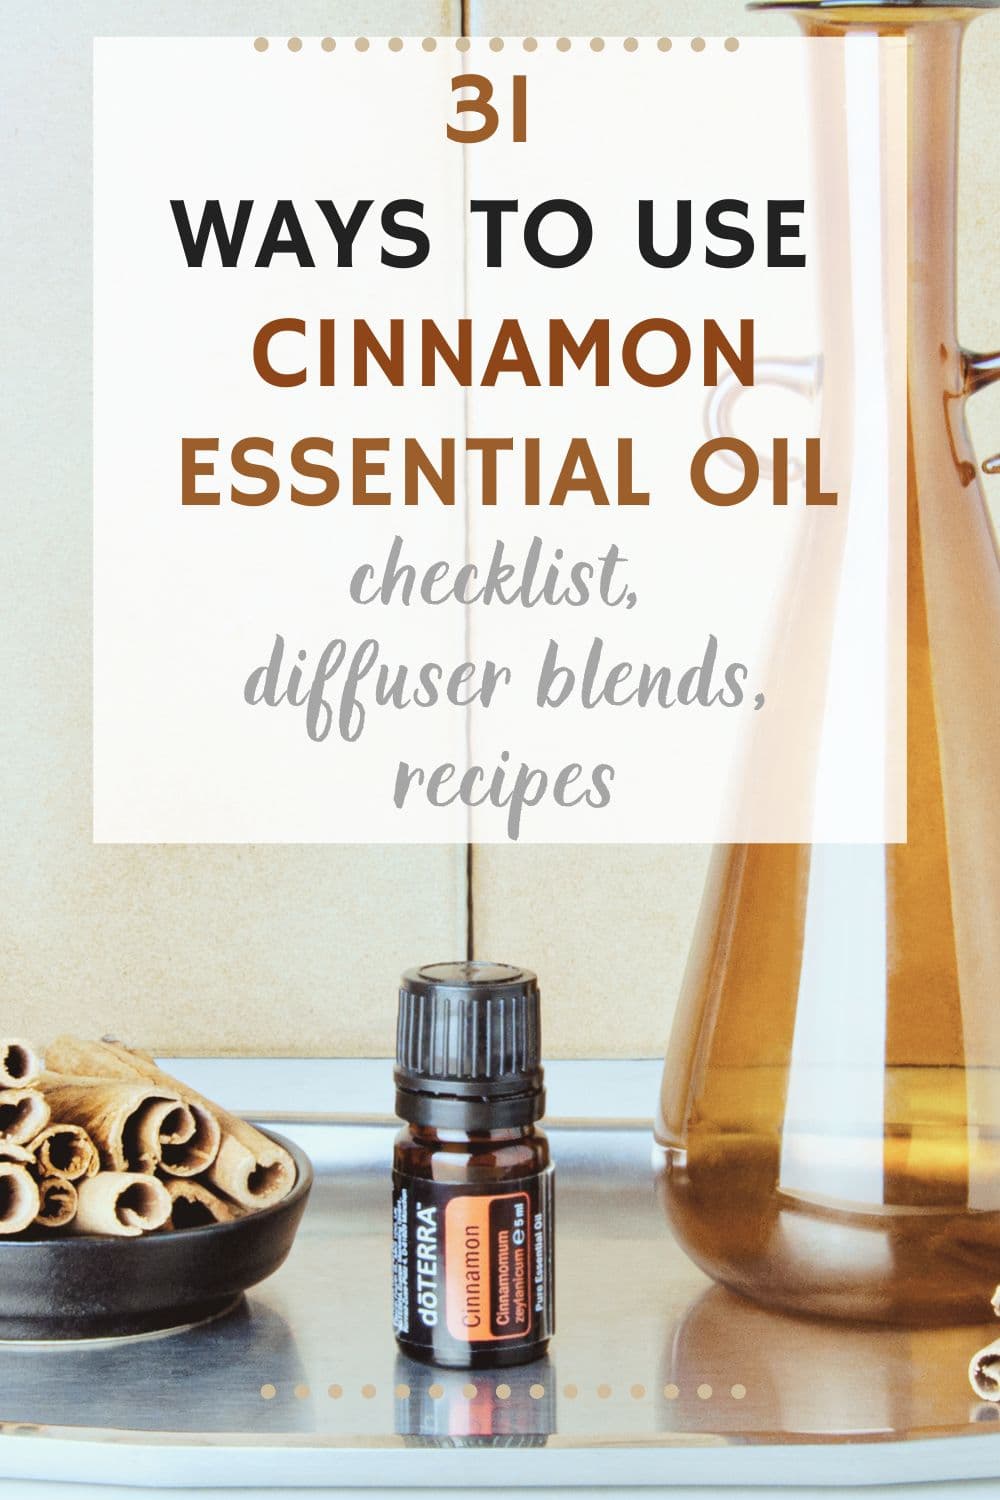 image of doterra cinnamon essential oil and text 31 ways to use cinnamon essential oil